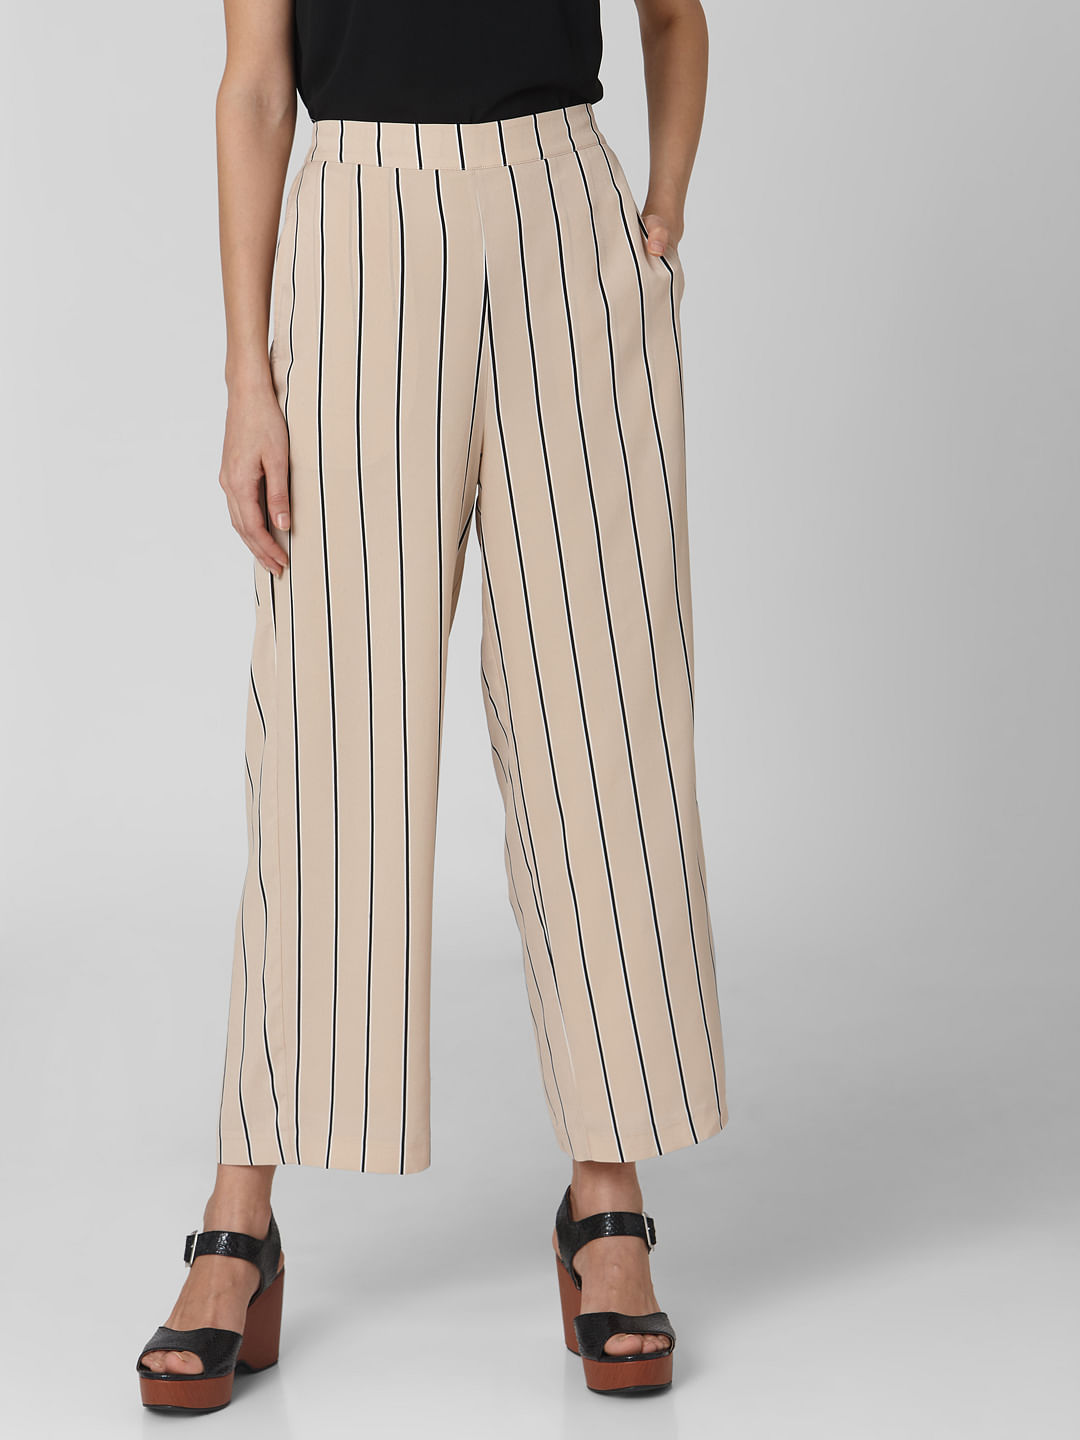 Buy Striped Linen Palazzo Pants  Loose Wide Leg Linen Trousers  Online in  India  Etsy